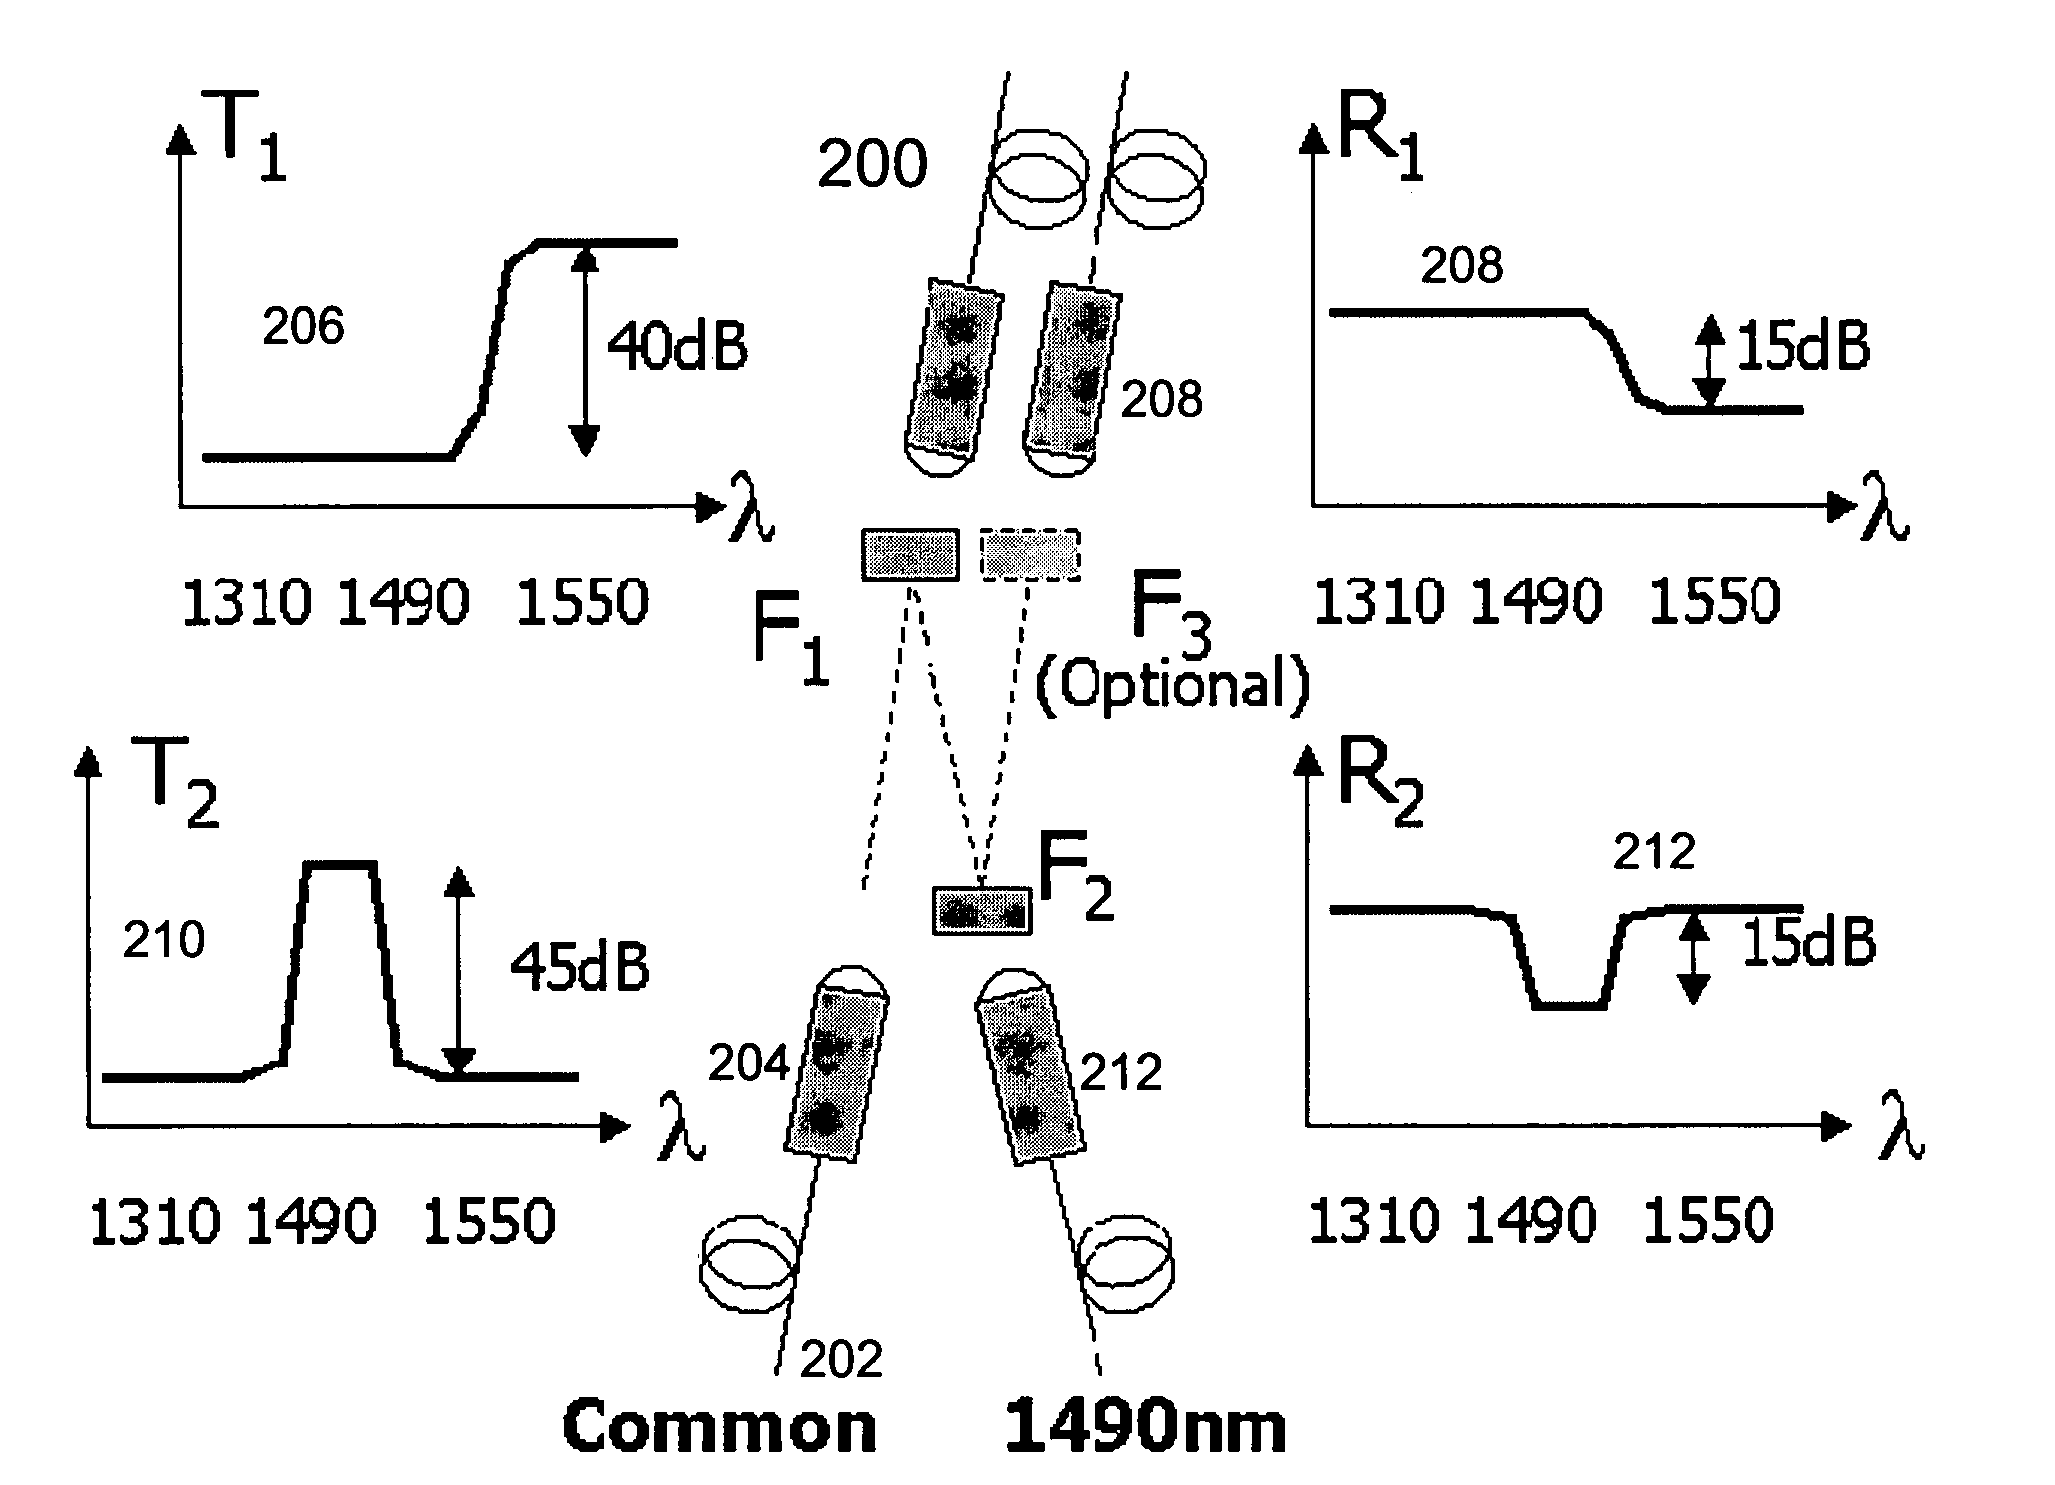 Multi-port high isolation filters